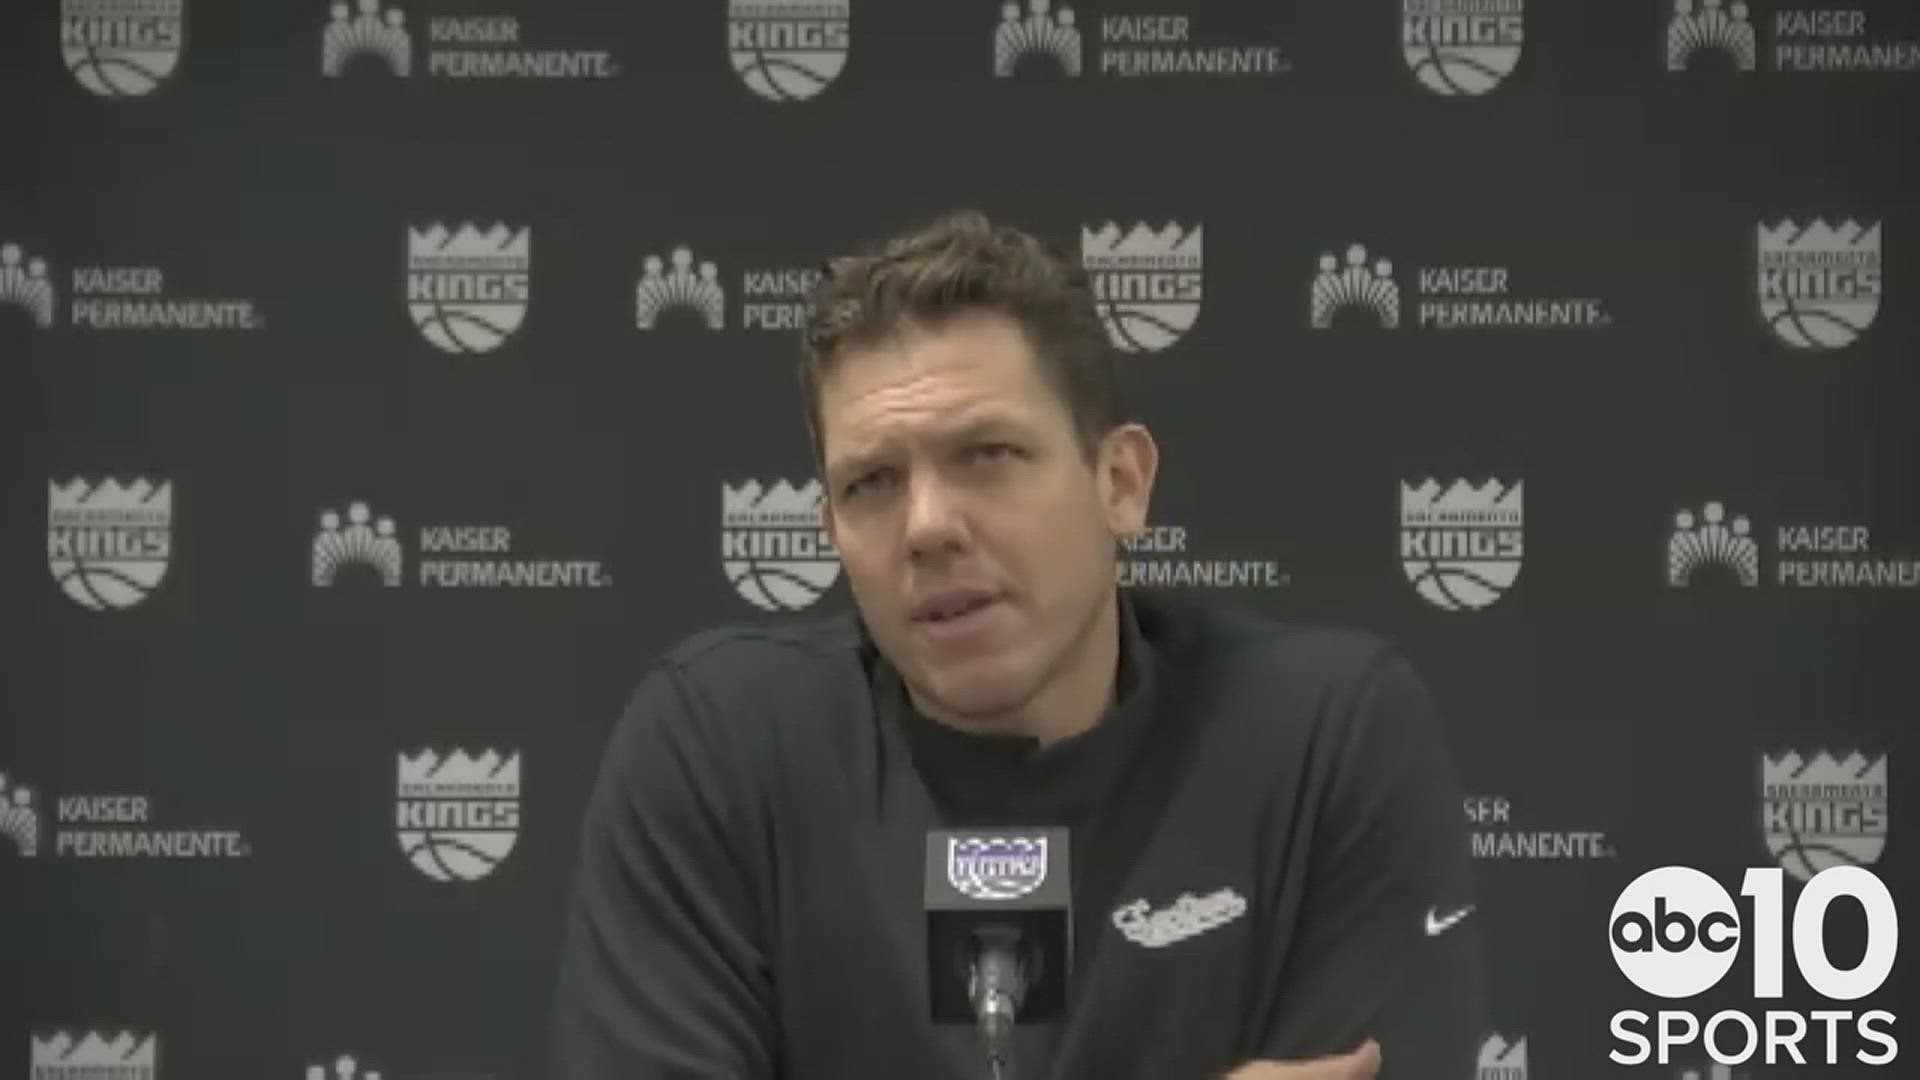 Kings' coach Luke Walton analyzes his team's shortcomings in Friday's 108-89 loss to the Toronto Raptors, hearing boo's in Sacramento & dropping 6 of last 7 games.